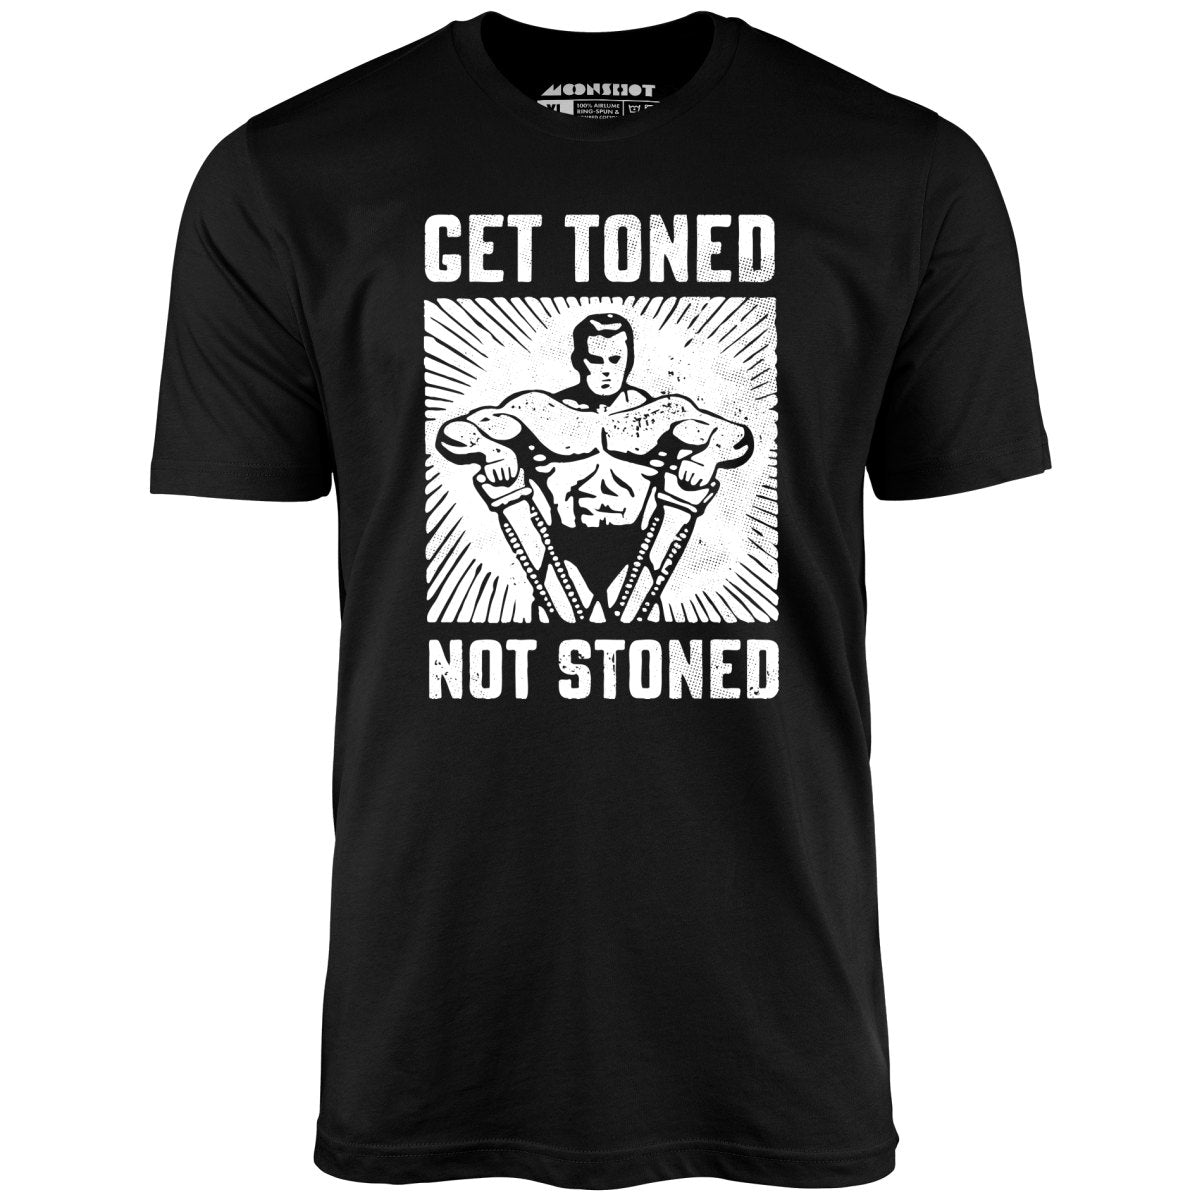 Get Toned Not Stoned - Unisex T-Shirt